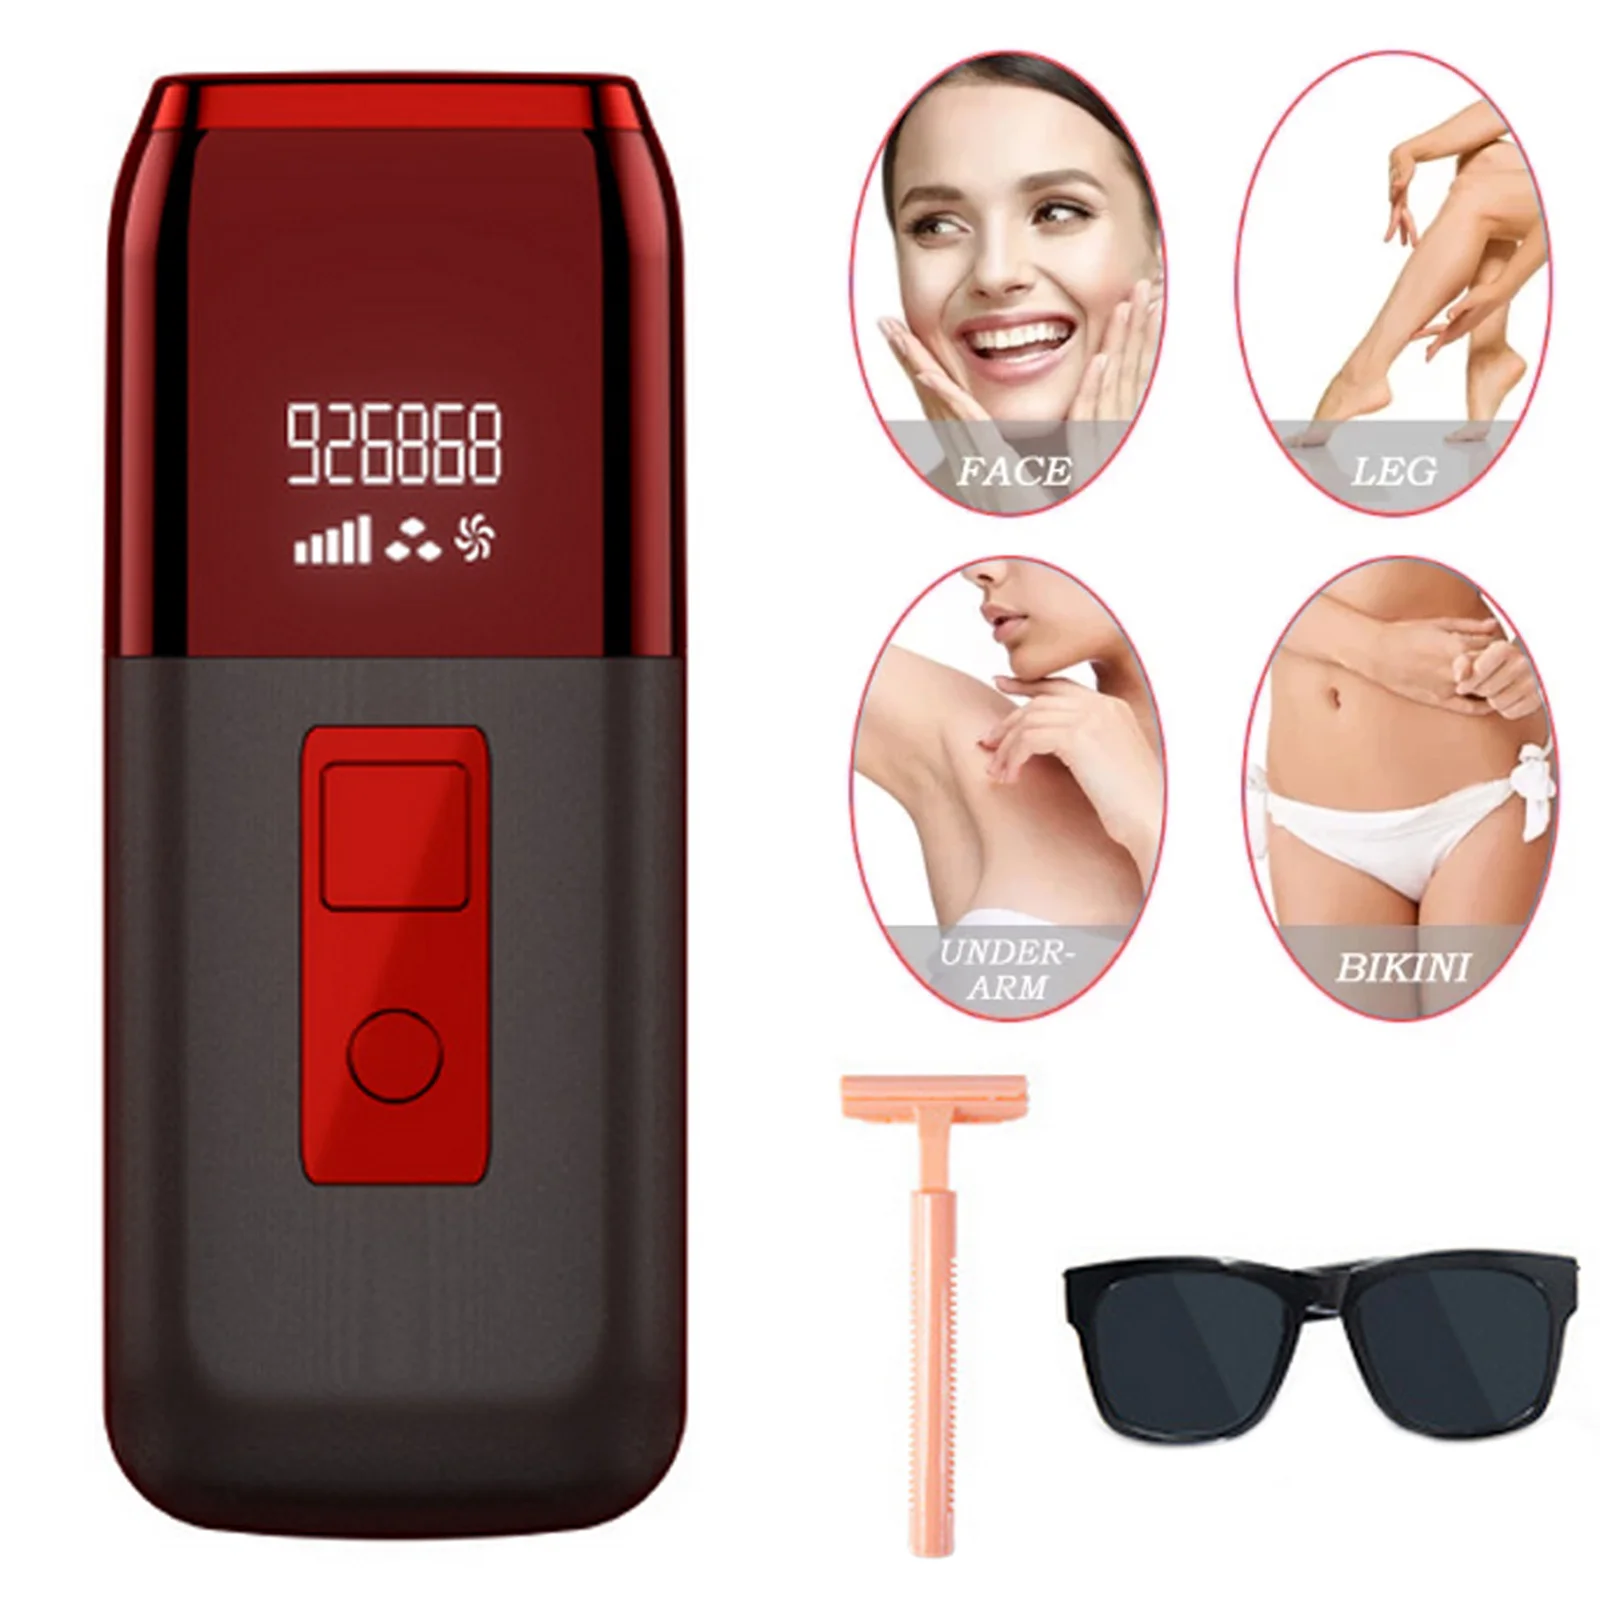 Hair Remover Portable Painless 1000000 Flashes IPL Hair Removal Device Machine with Shaver Goggles Whole Body Home Use EU Plug leakproof anti fog swimming snorkeling goggles with dry snorkel tube